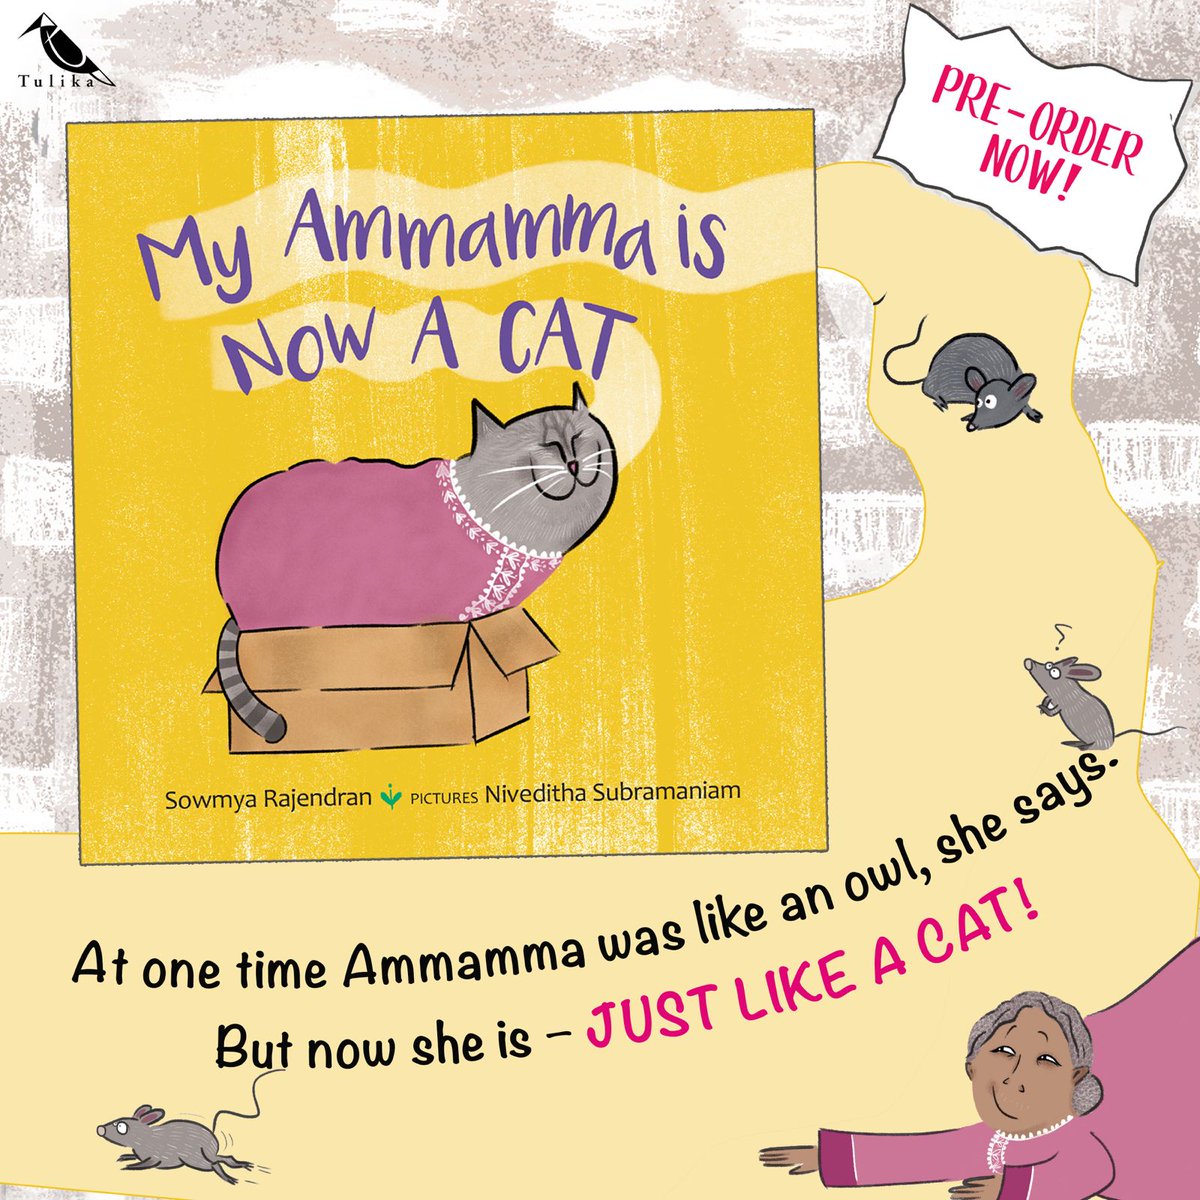 #COMINGSOON Here is the first look of our soon to release picture book! My Ammamma is NOW A CAT, written by Sowmya Rajendran @sowmyarajen and illustrated by Niveditha Subramaniam @nivedithasubramaniam is now available for pre-order on our website tulikabooks.com